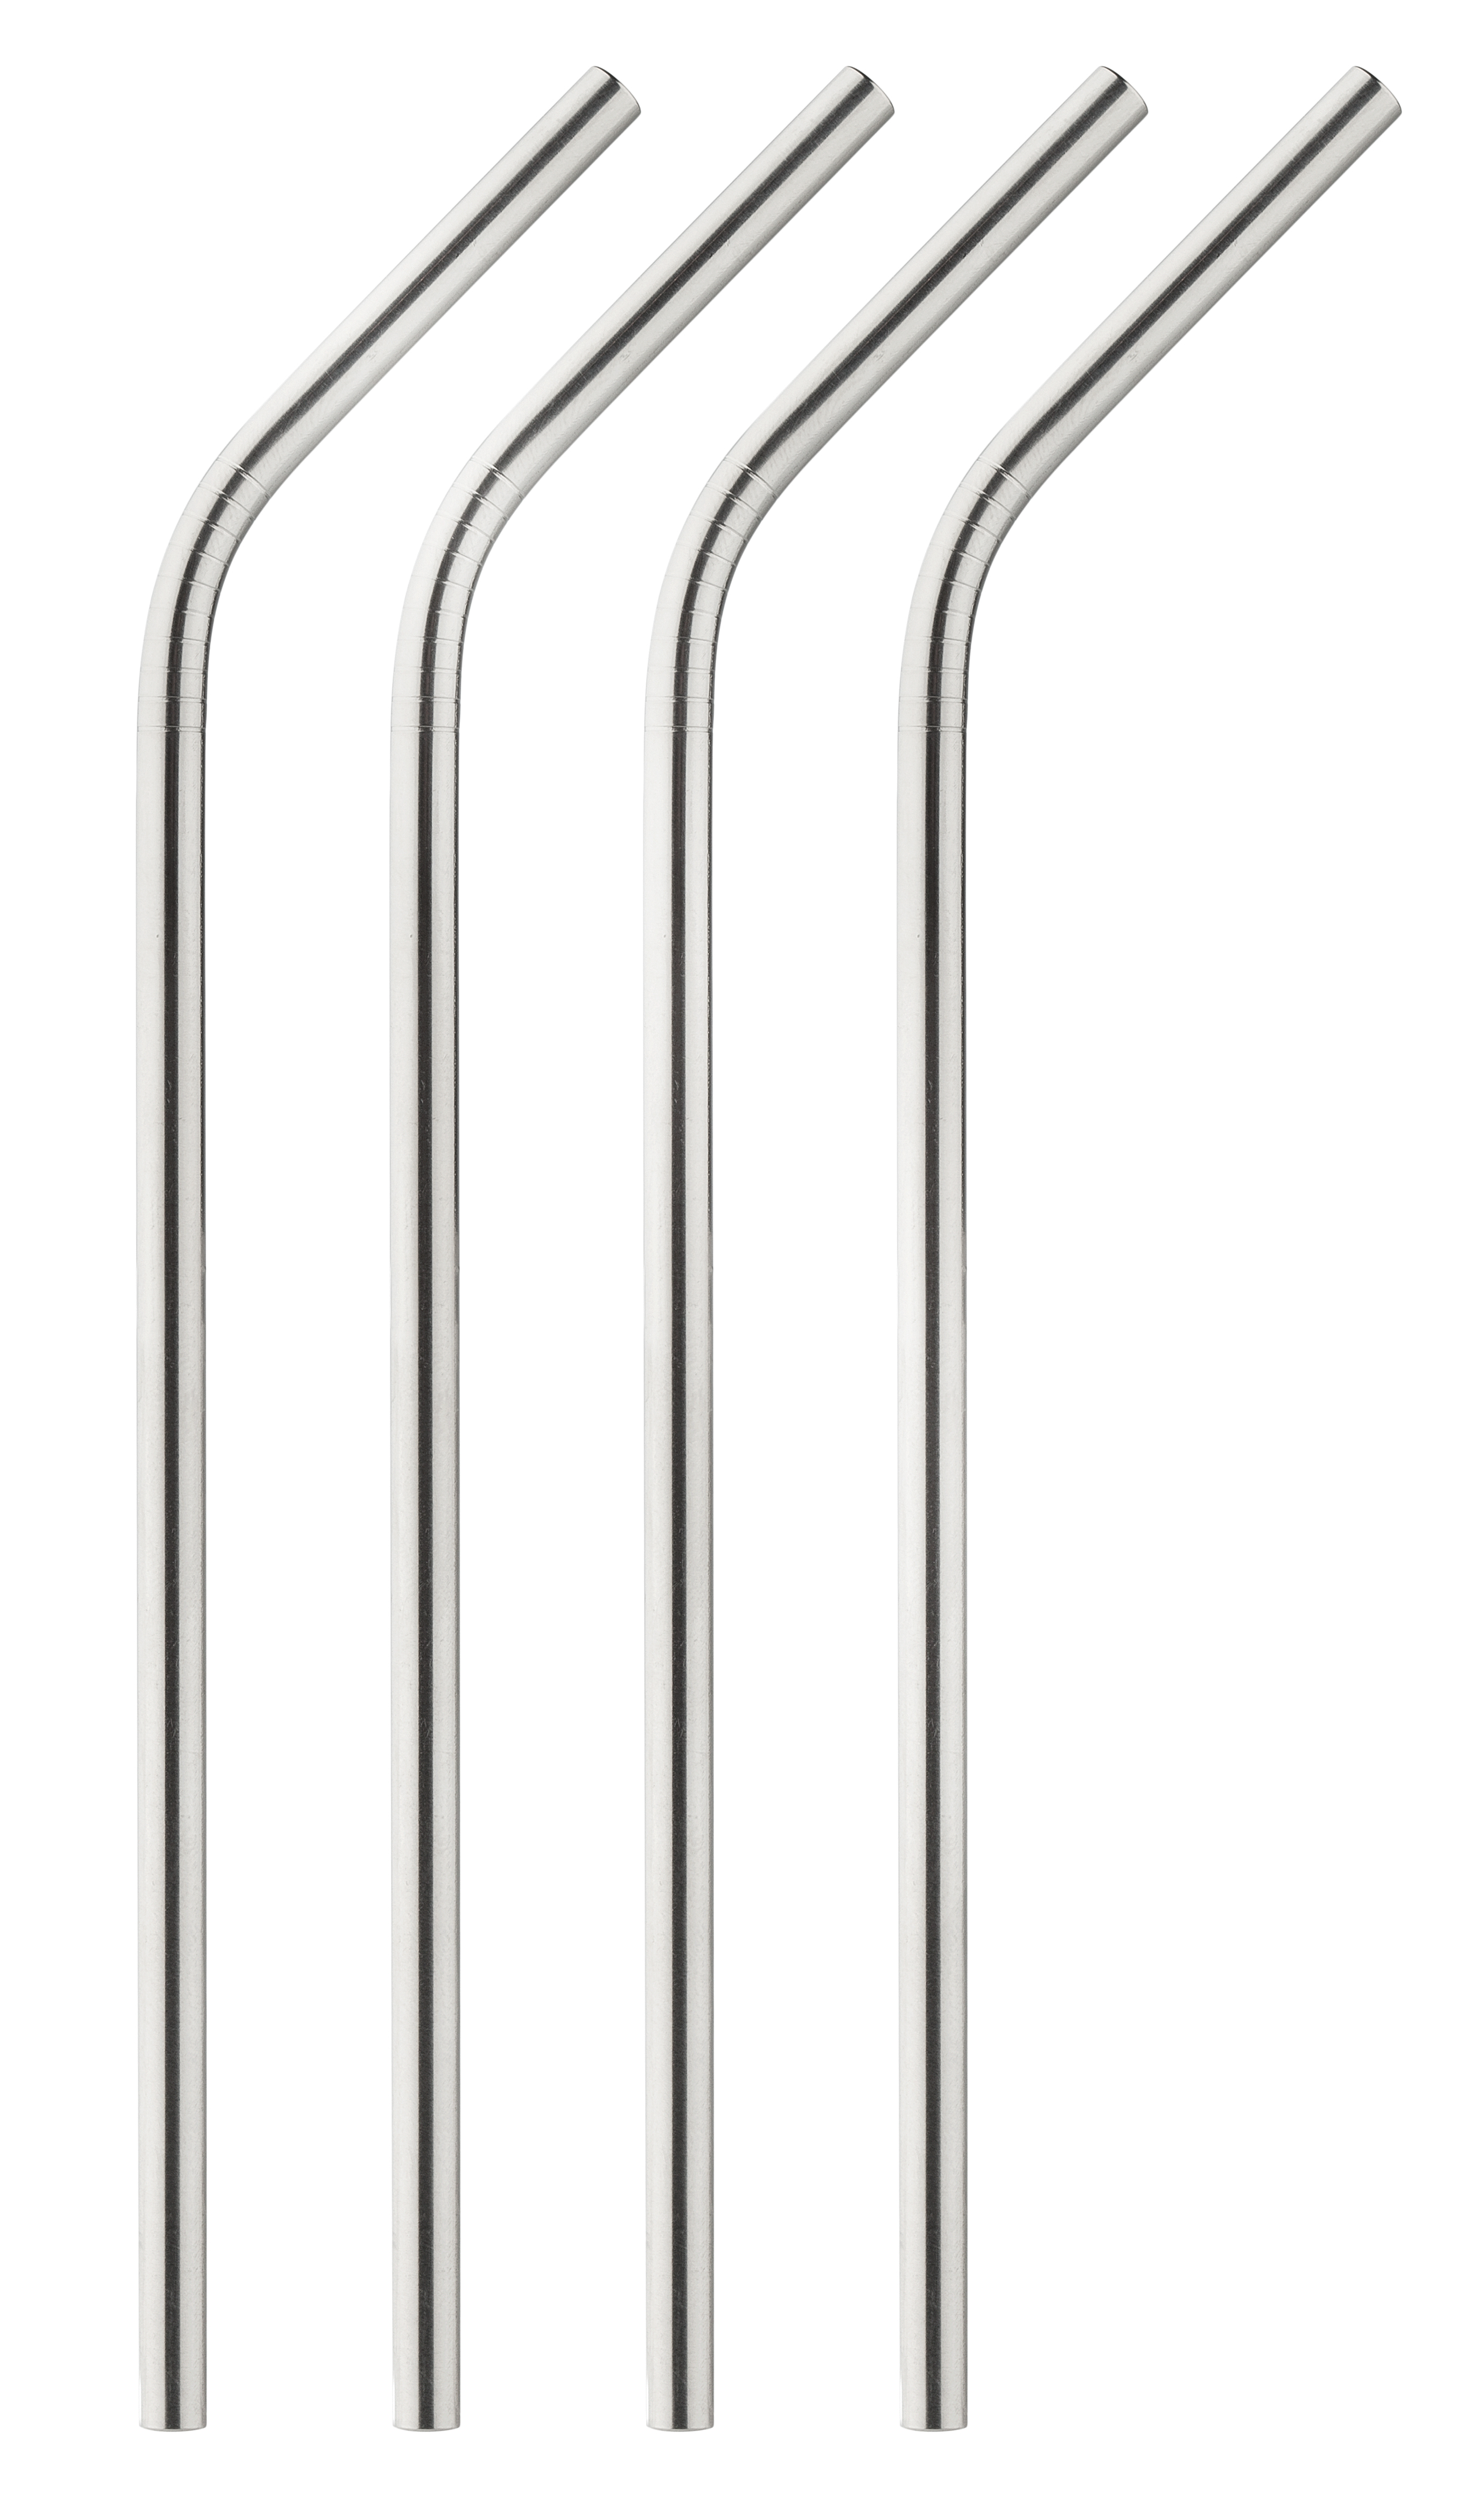 HIC Stainless Steel Reuseable Drinking Straws with Cleaning Brush